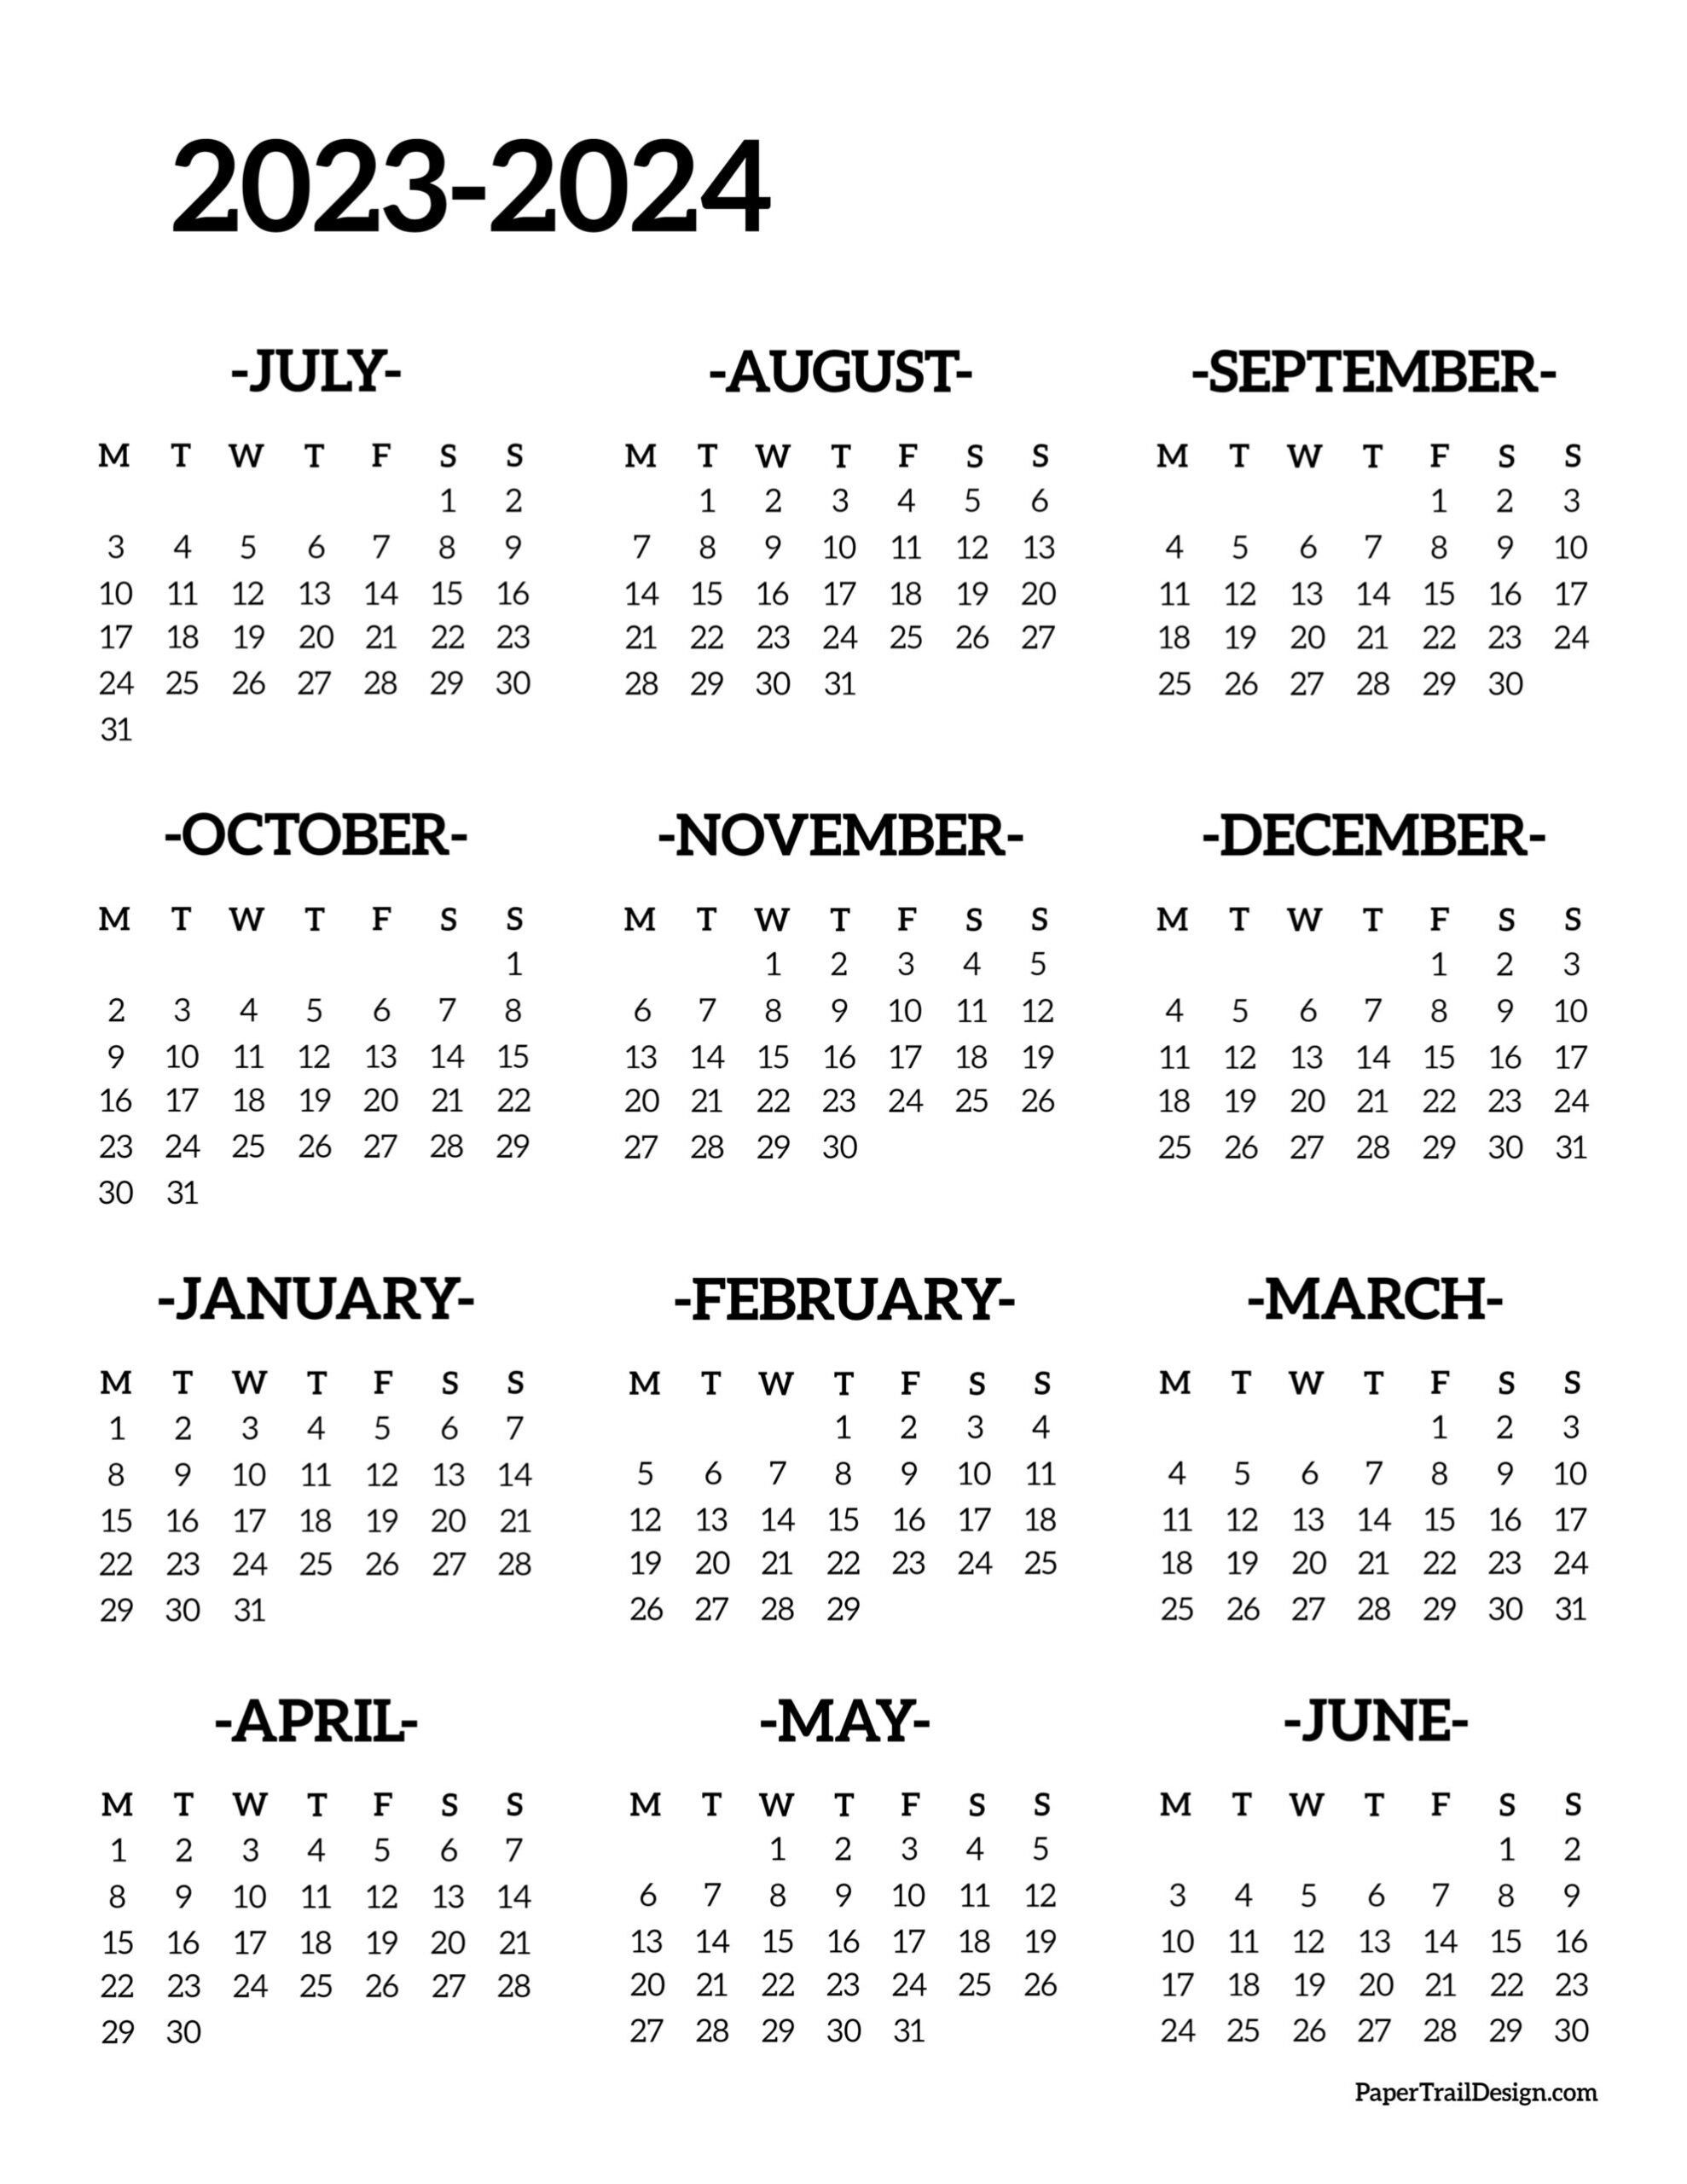 2023-2024 School Year Calendar Free Printable - Paper Trail Design | Yearly Calendar 2023 And 2024 Printable